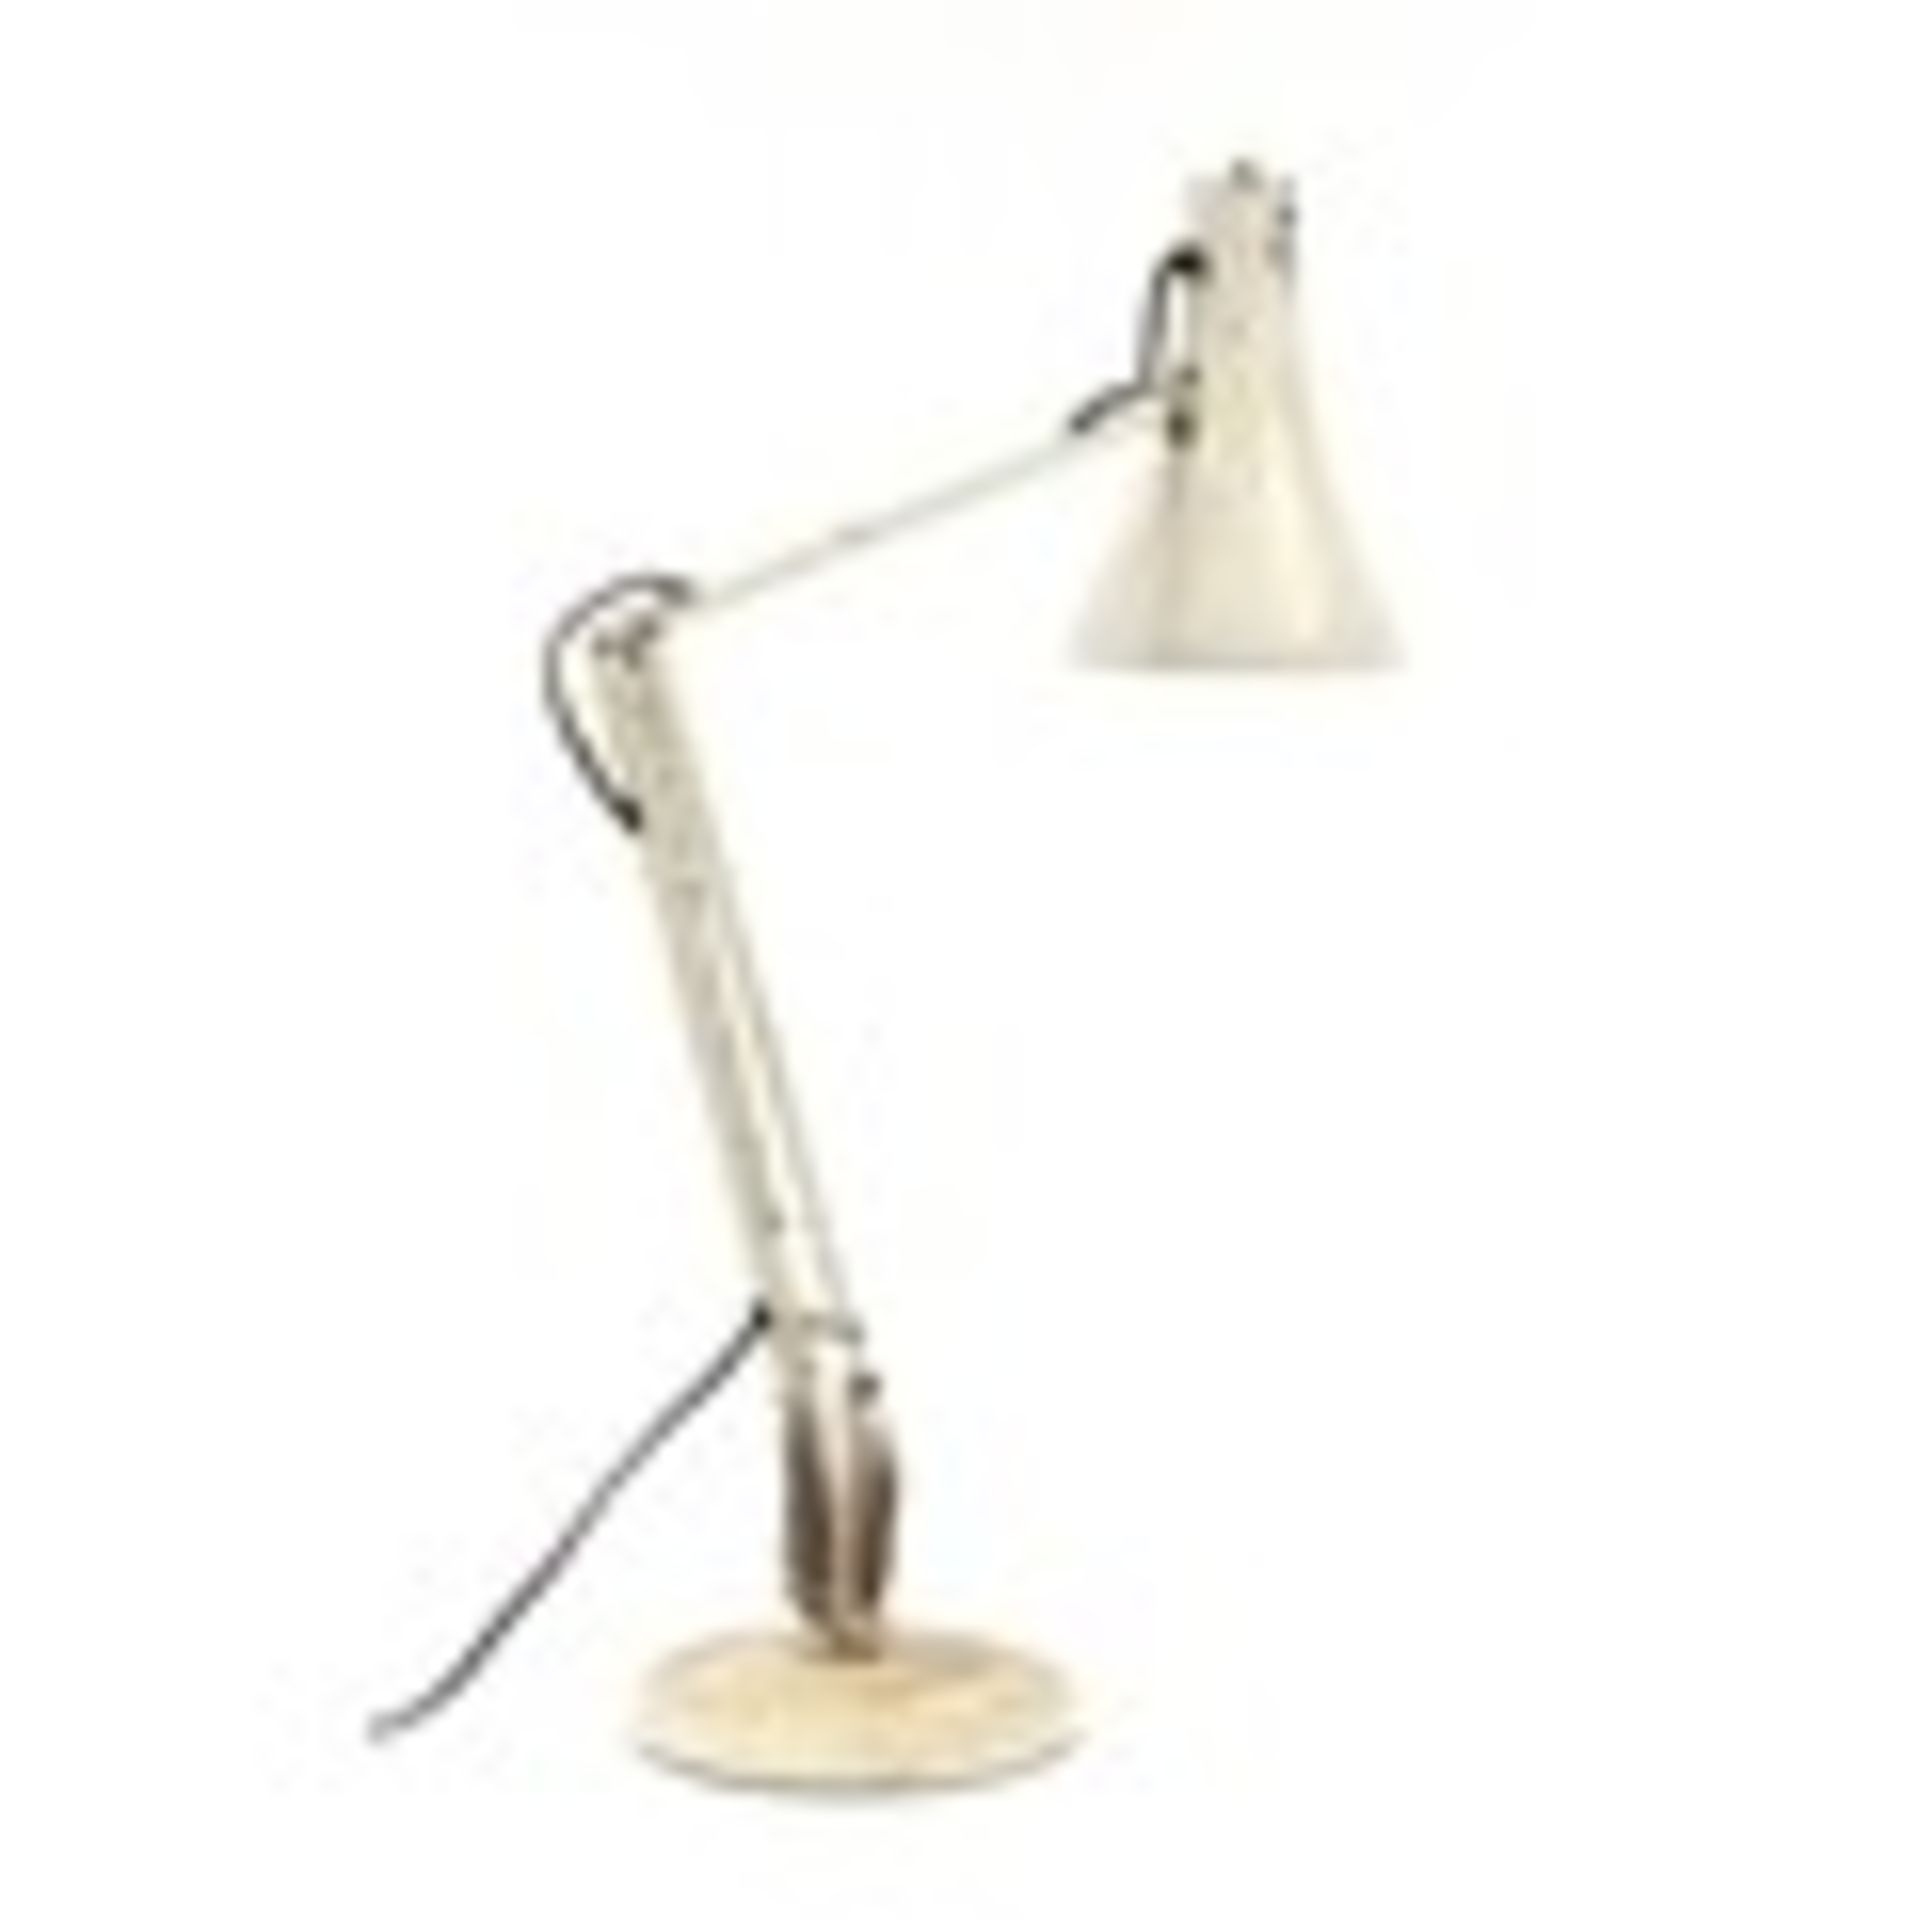 Vintage Anglepoise lamp :For Further Condition Reports Please Visit Our Website, Updated Daily - Image 2 of 4